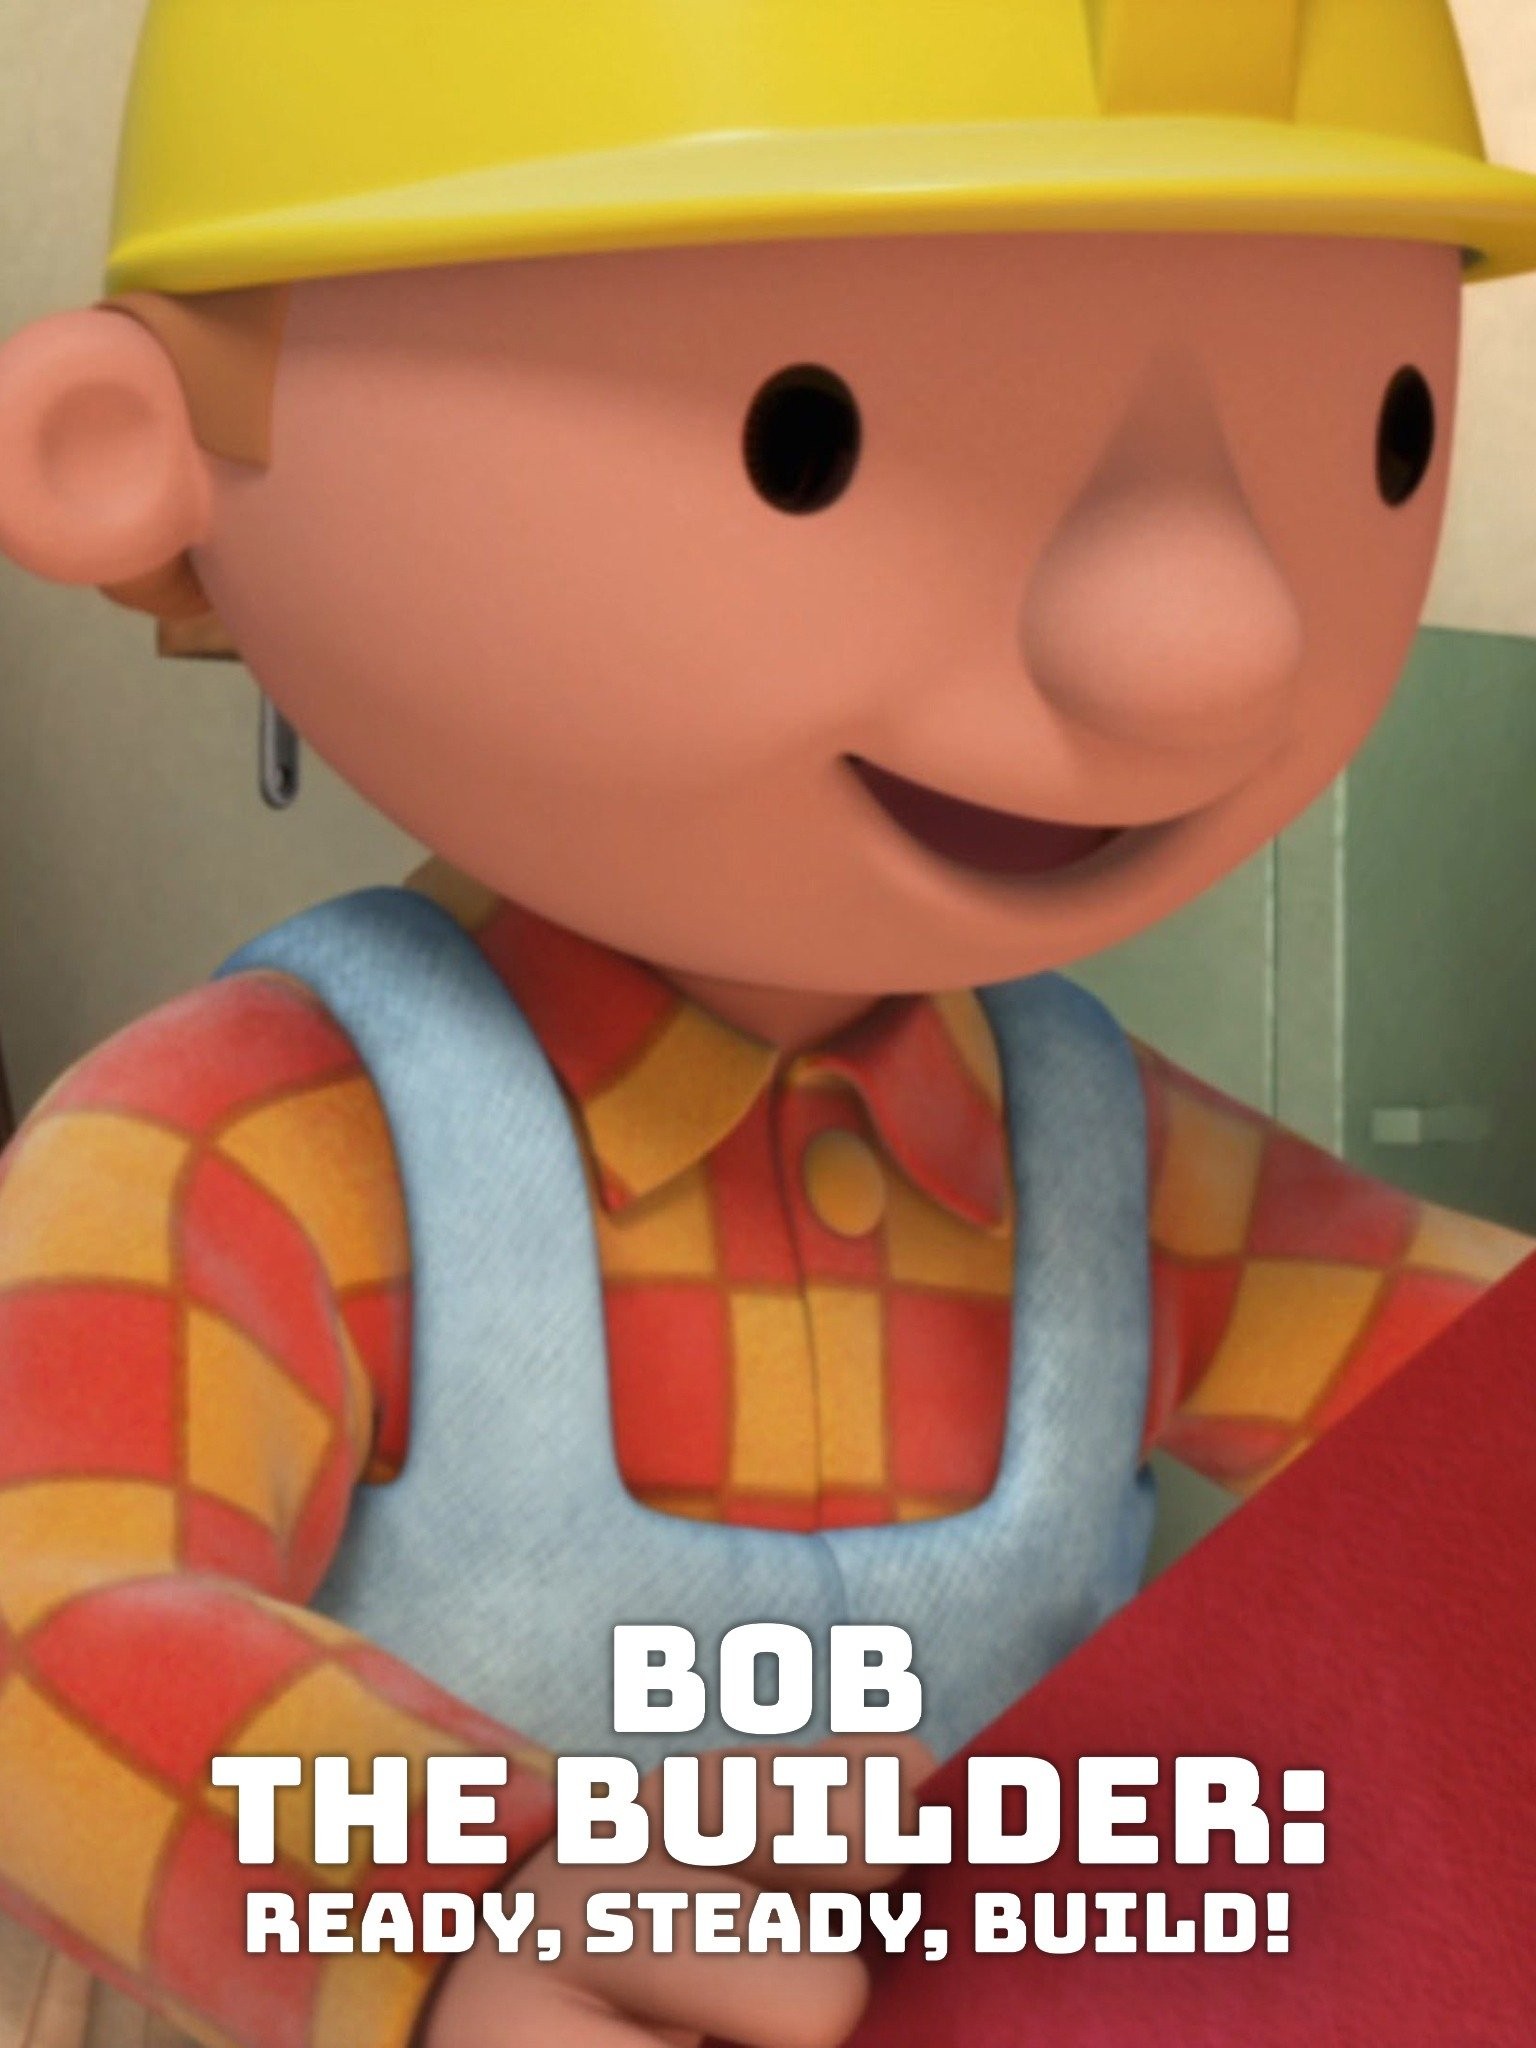 bob the builder meme yes we can